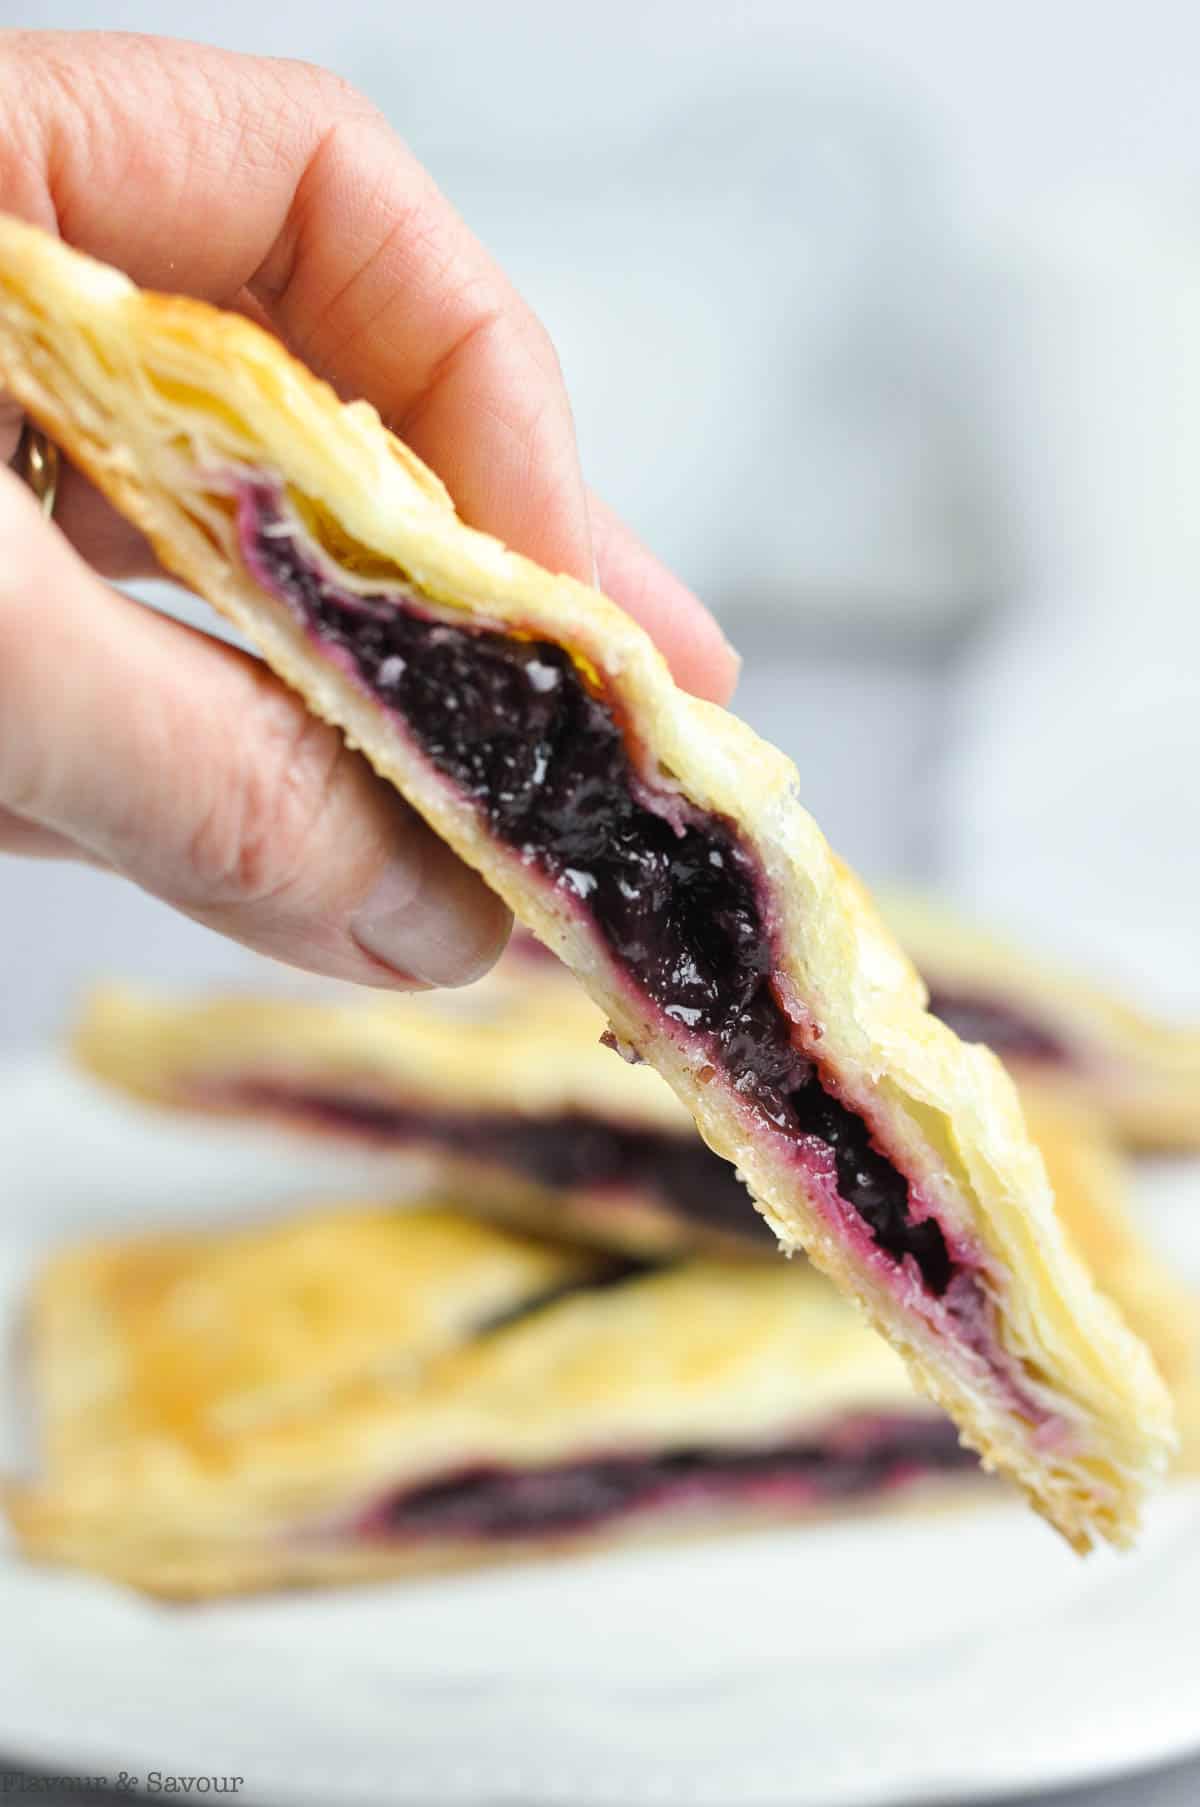 A hand holding a gluten-free sliced cherry turnover.